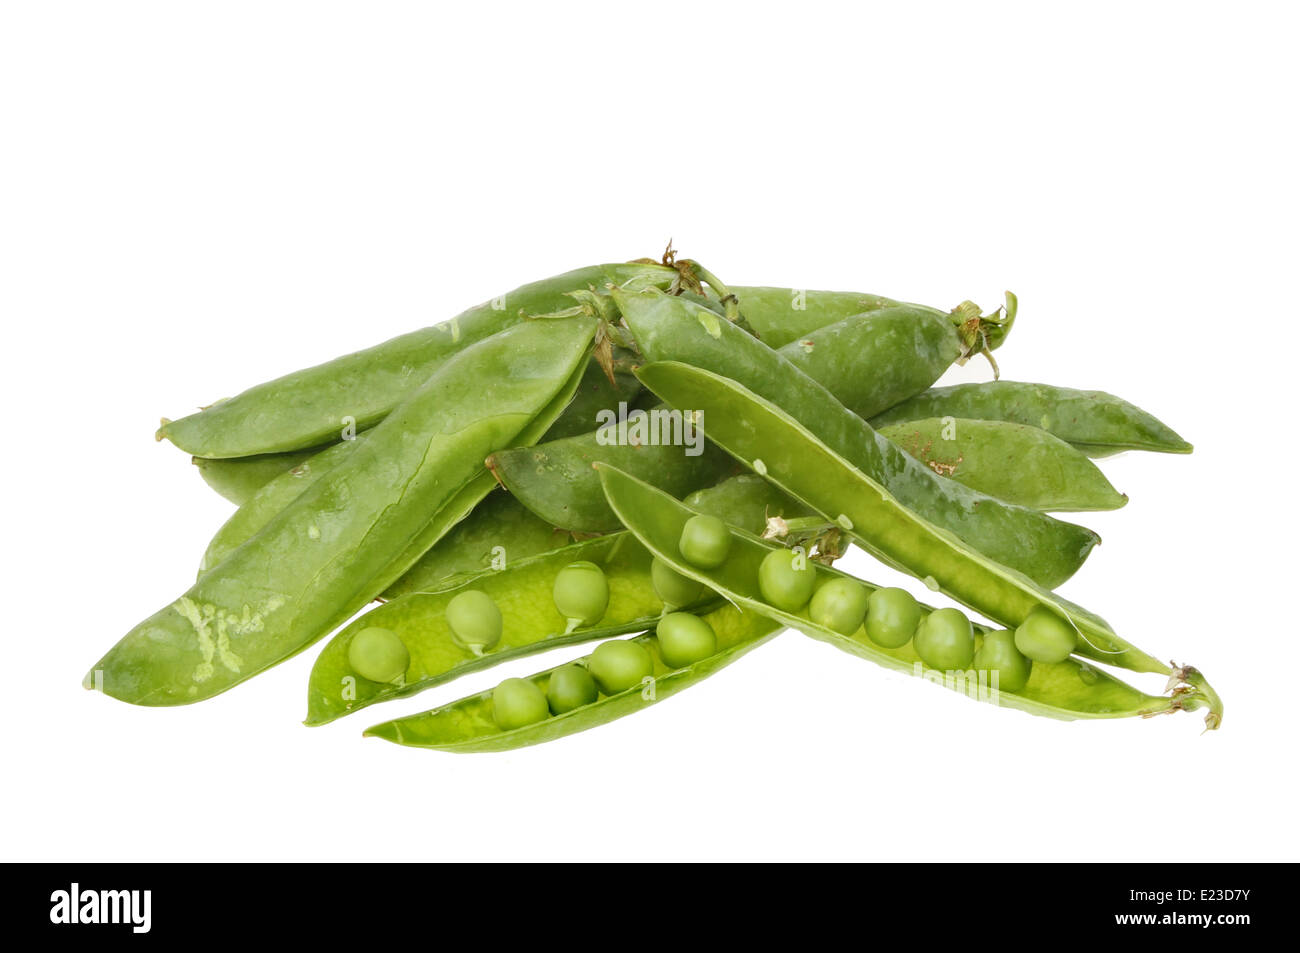 Whole pea pods and shelled peas isolated against white Stock Photo